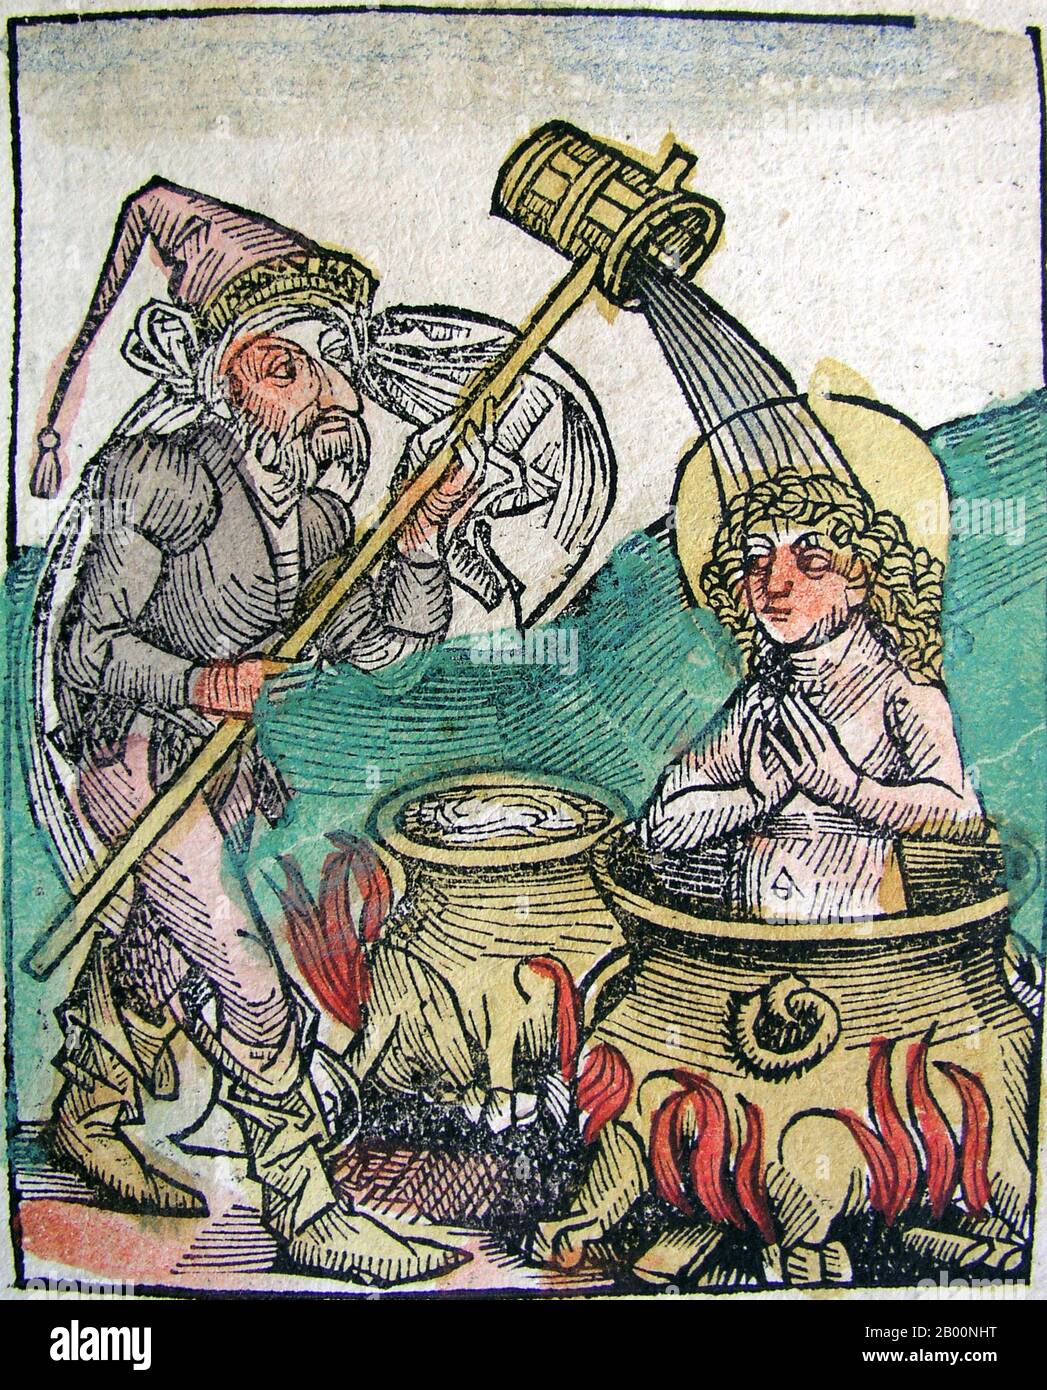 Germany: 'John Boiled in Oil'. The Nuremberg Chronicle, by Hartmann Schedel  (1440-1514), 1493. The Nuremberg Chronicle is an illustrated world history.  Its structure follows the story of human history as related in